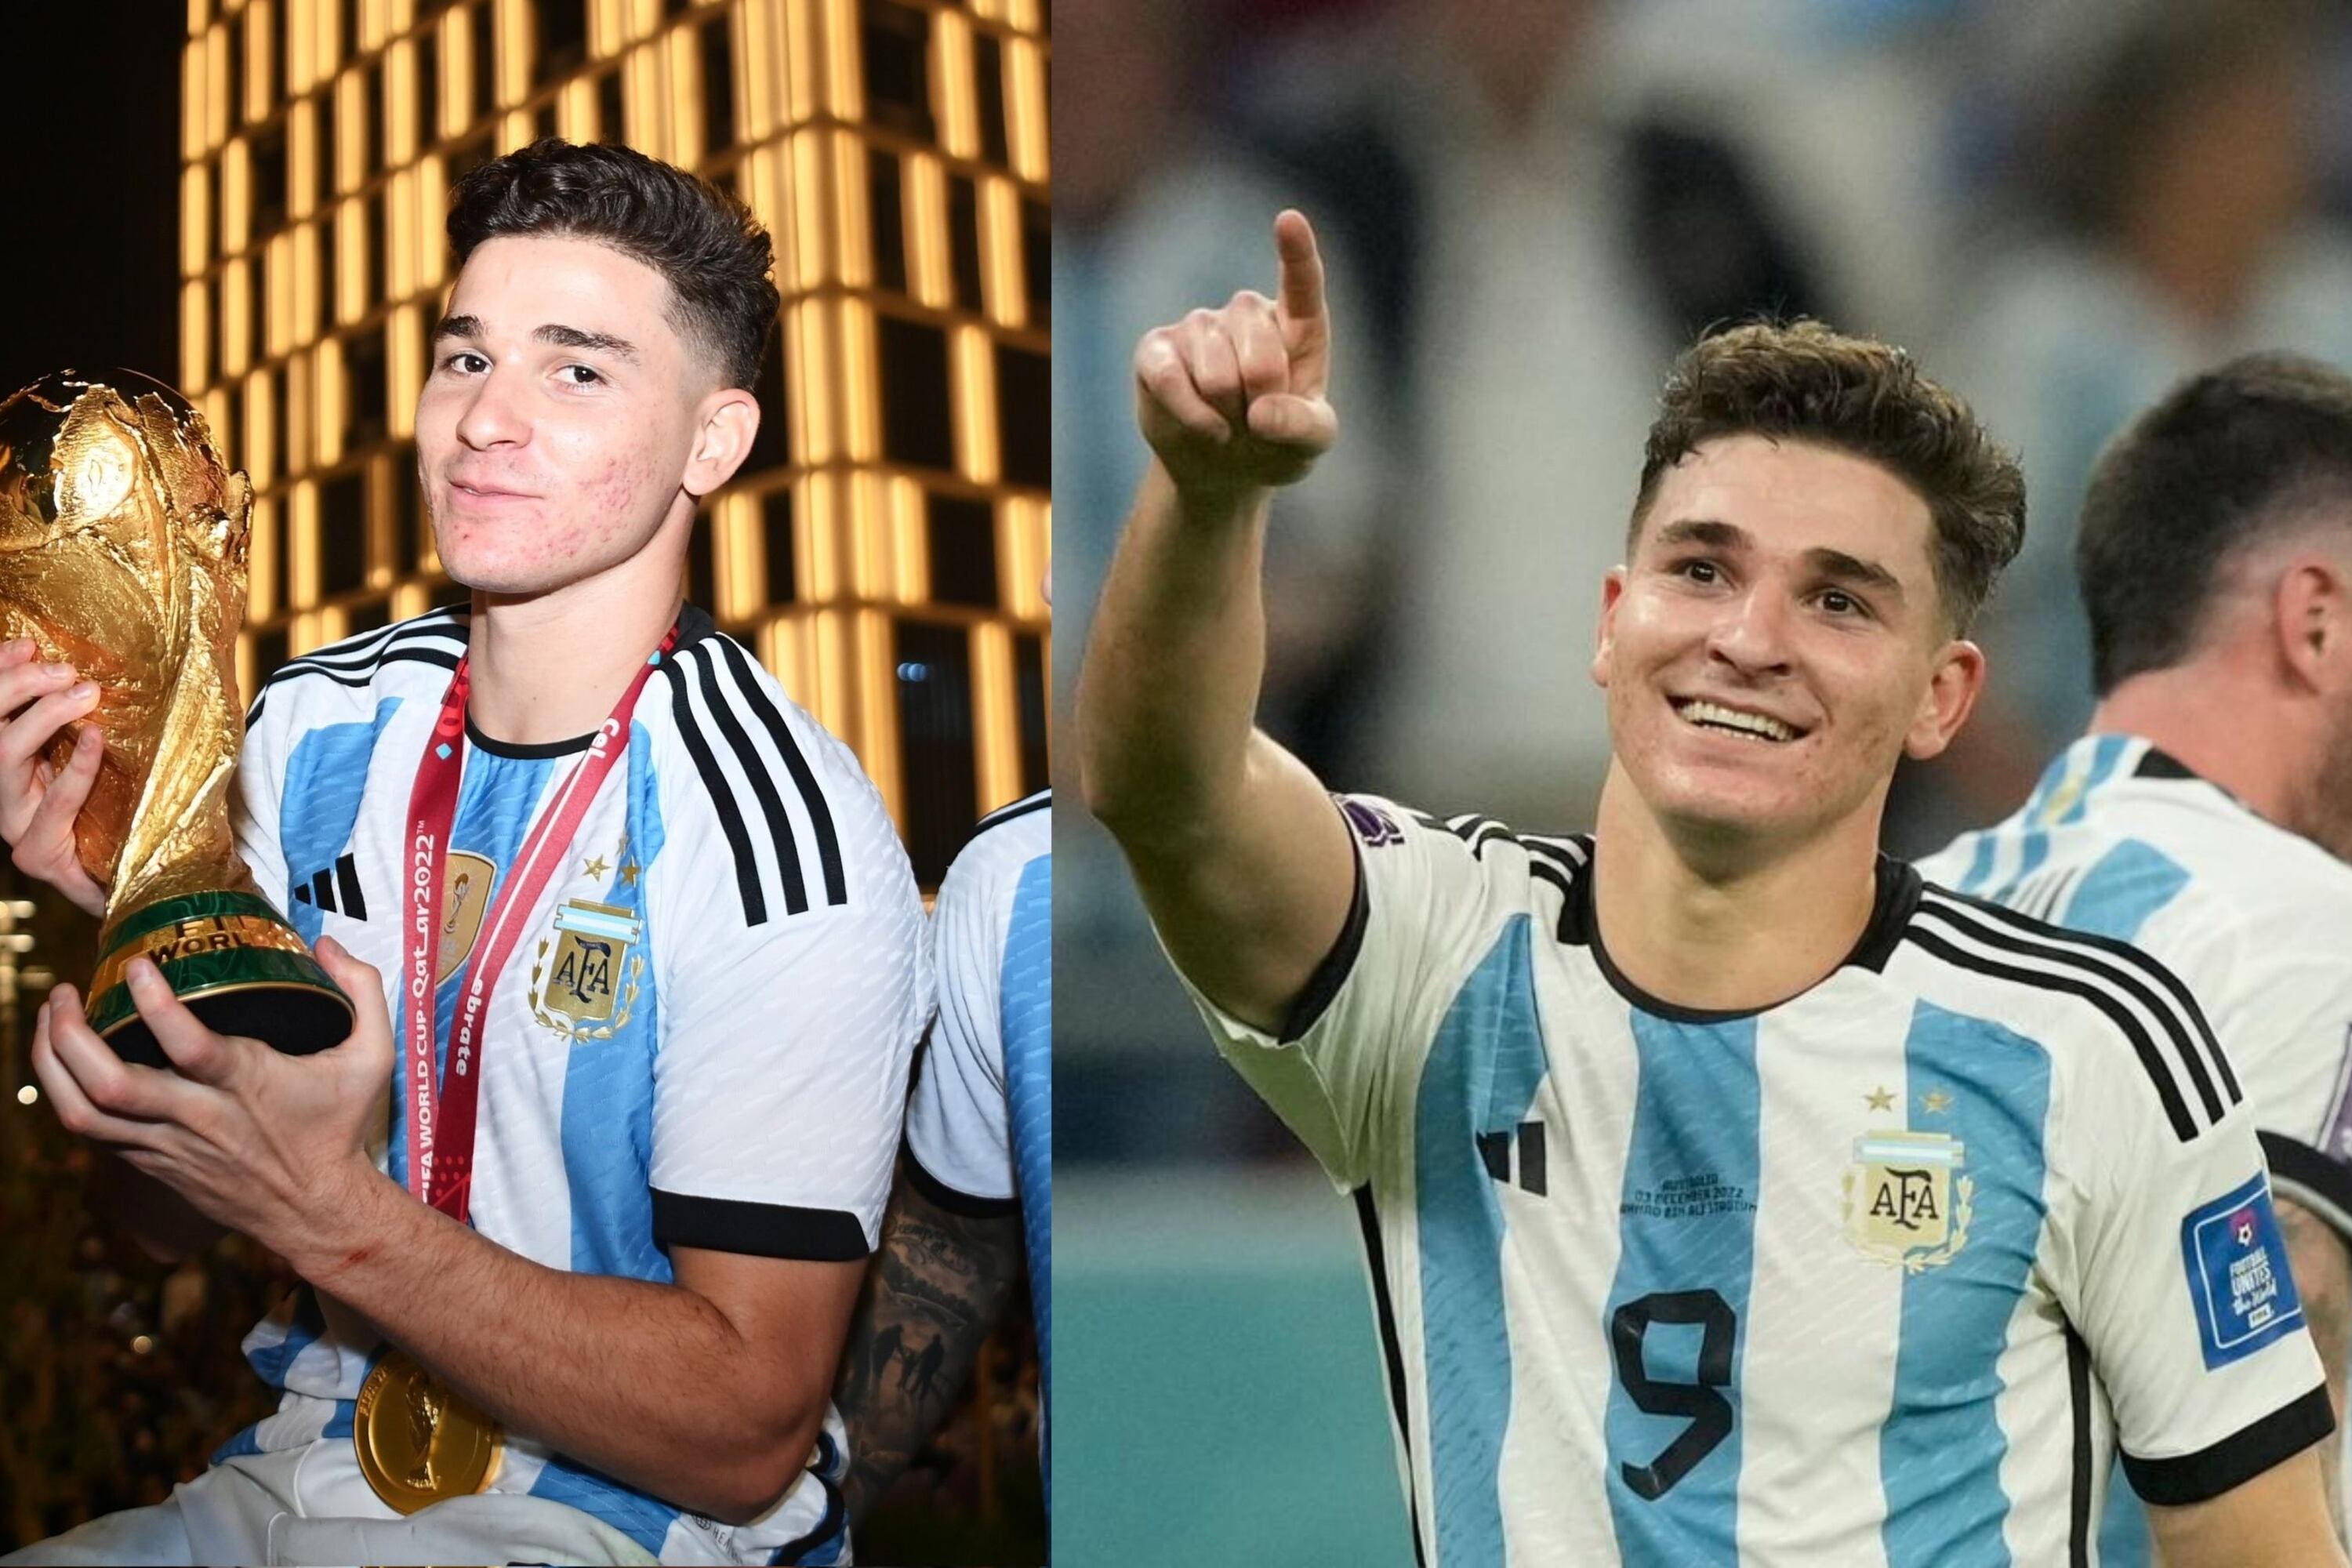 He won the World Cup with Argentina, now he could be Julian Alvarez's new teammate at Manchester City